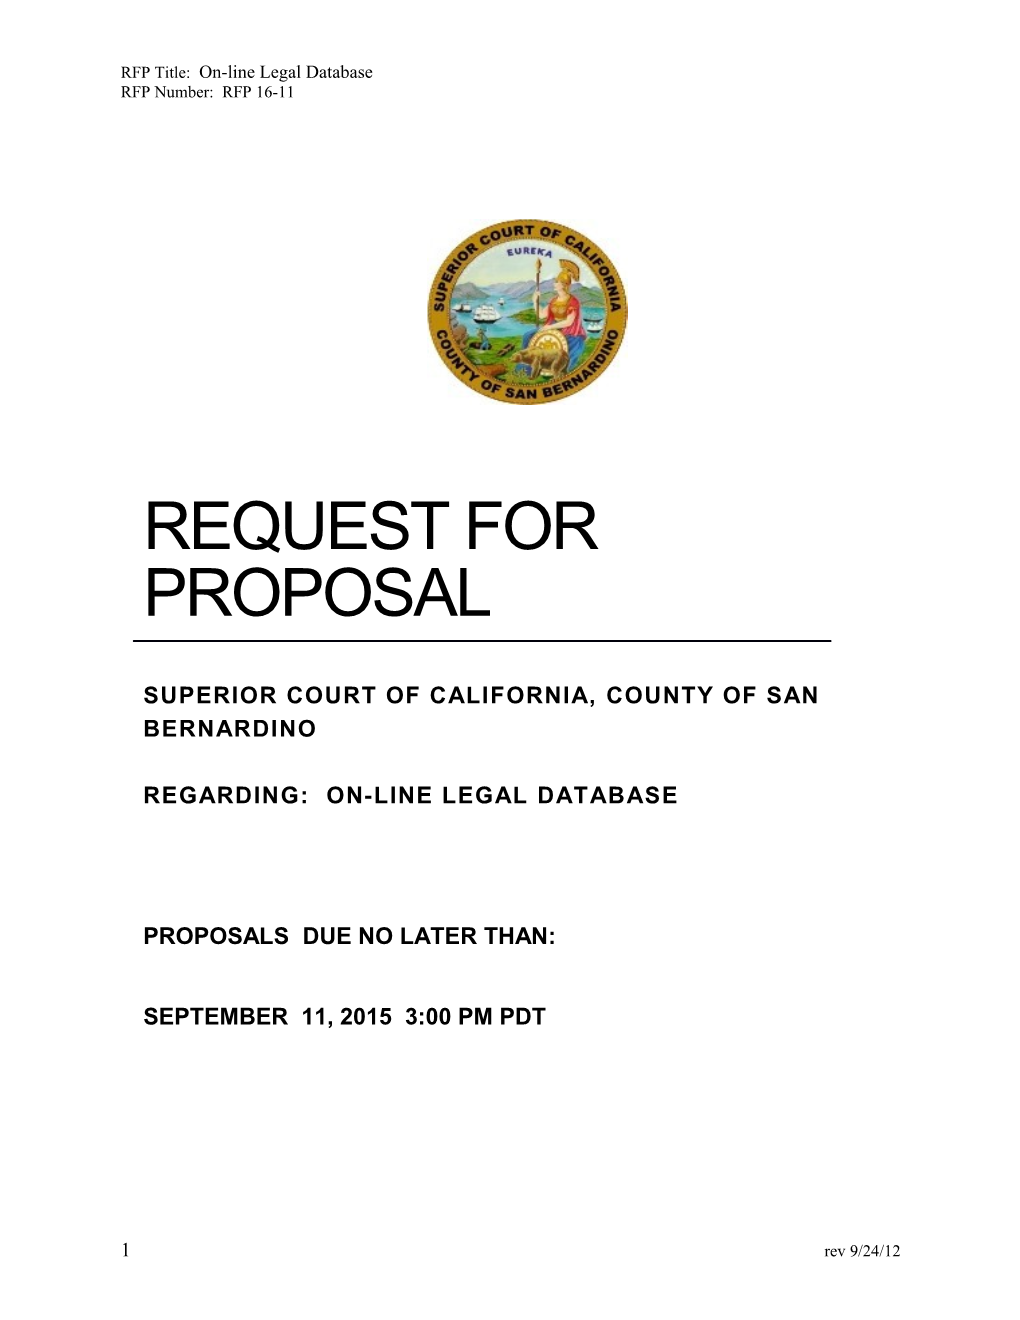 RFP Title: On-Line Legal Database